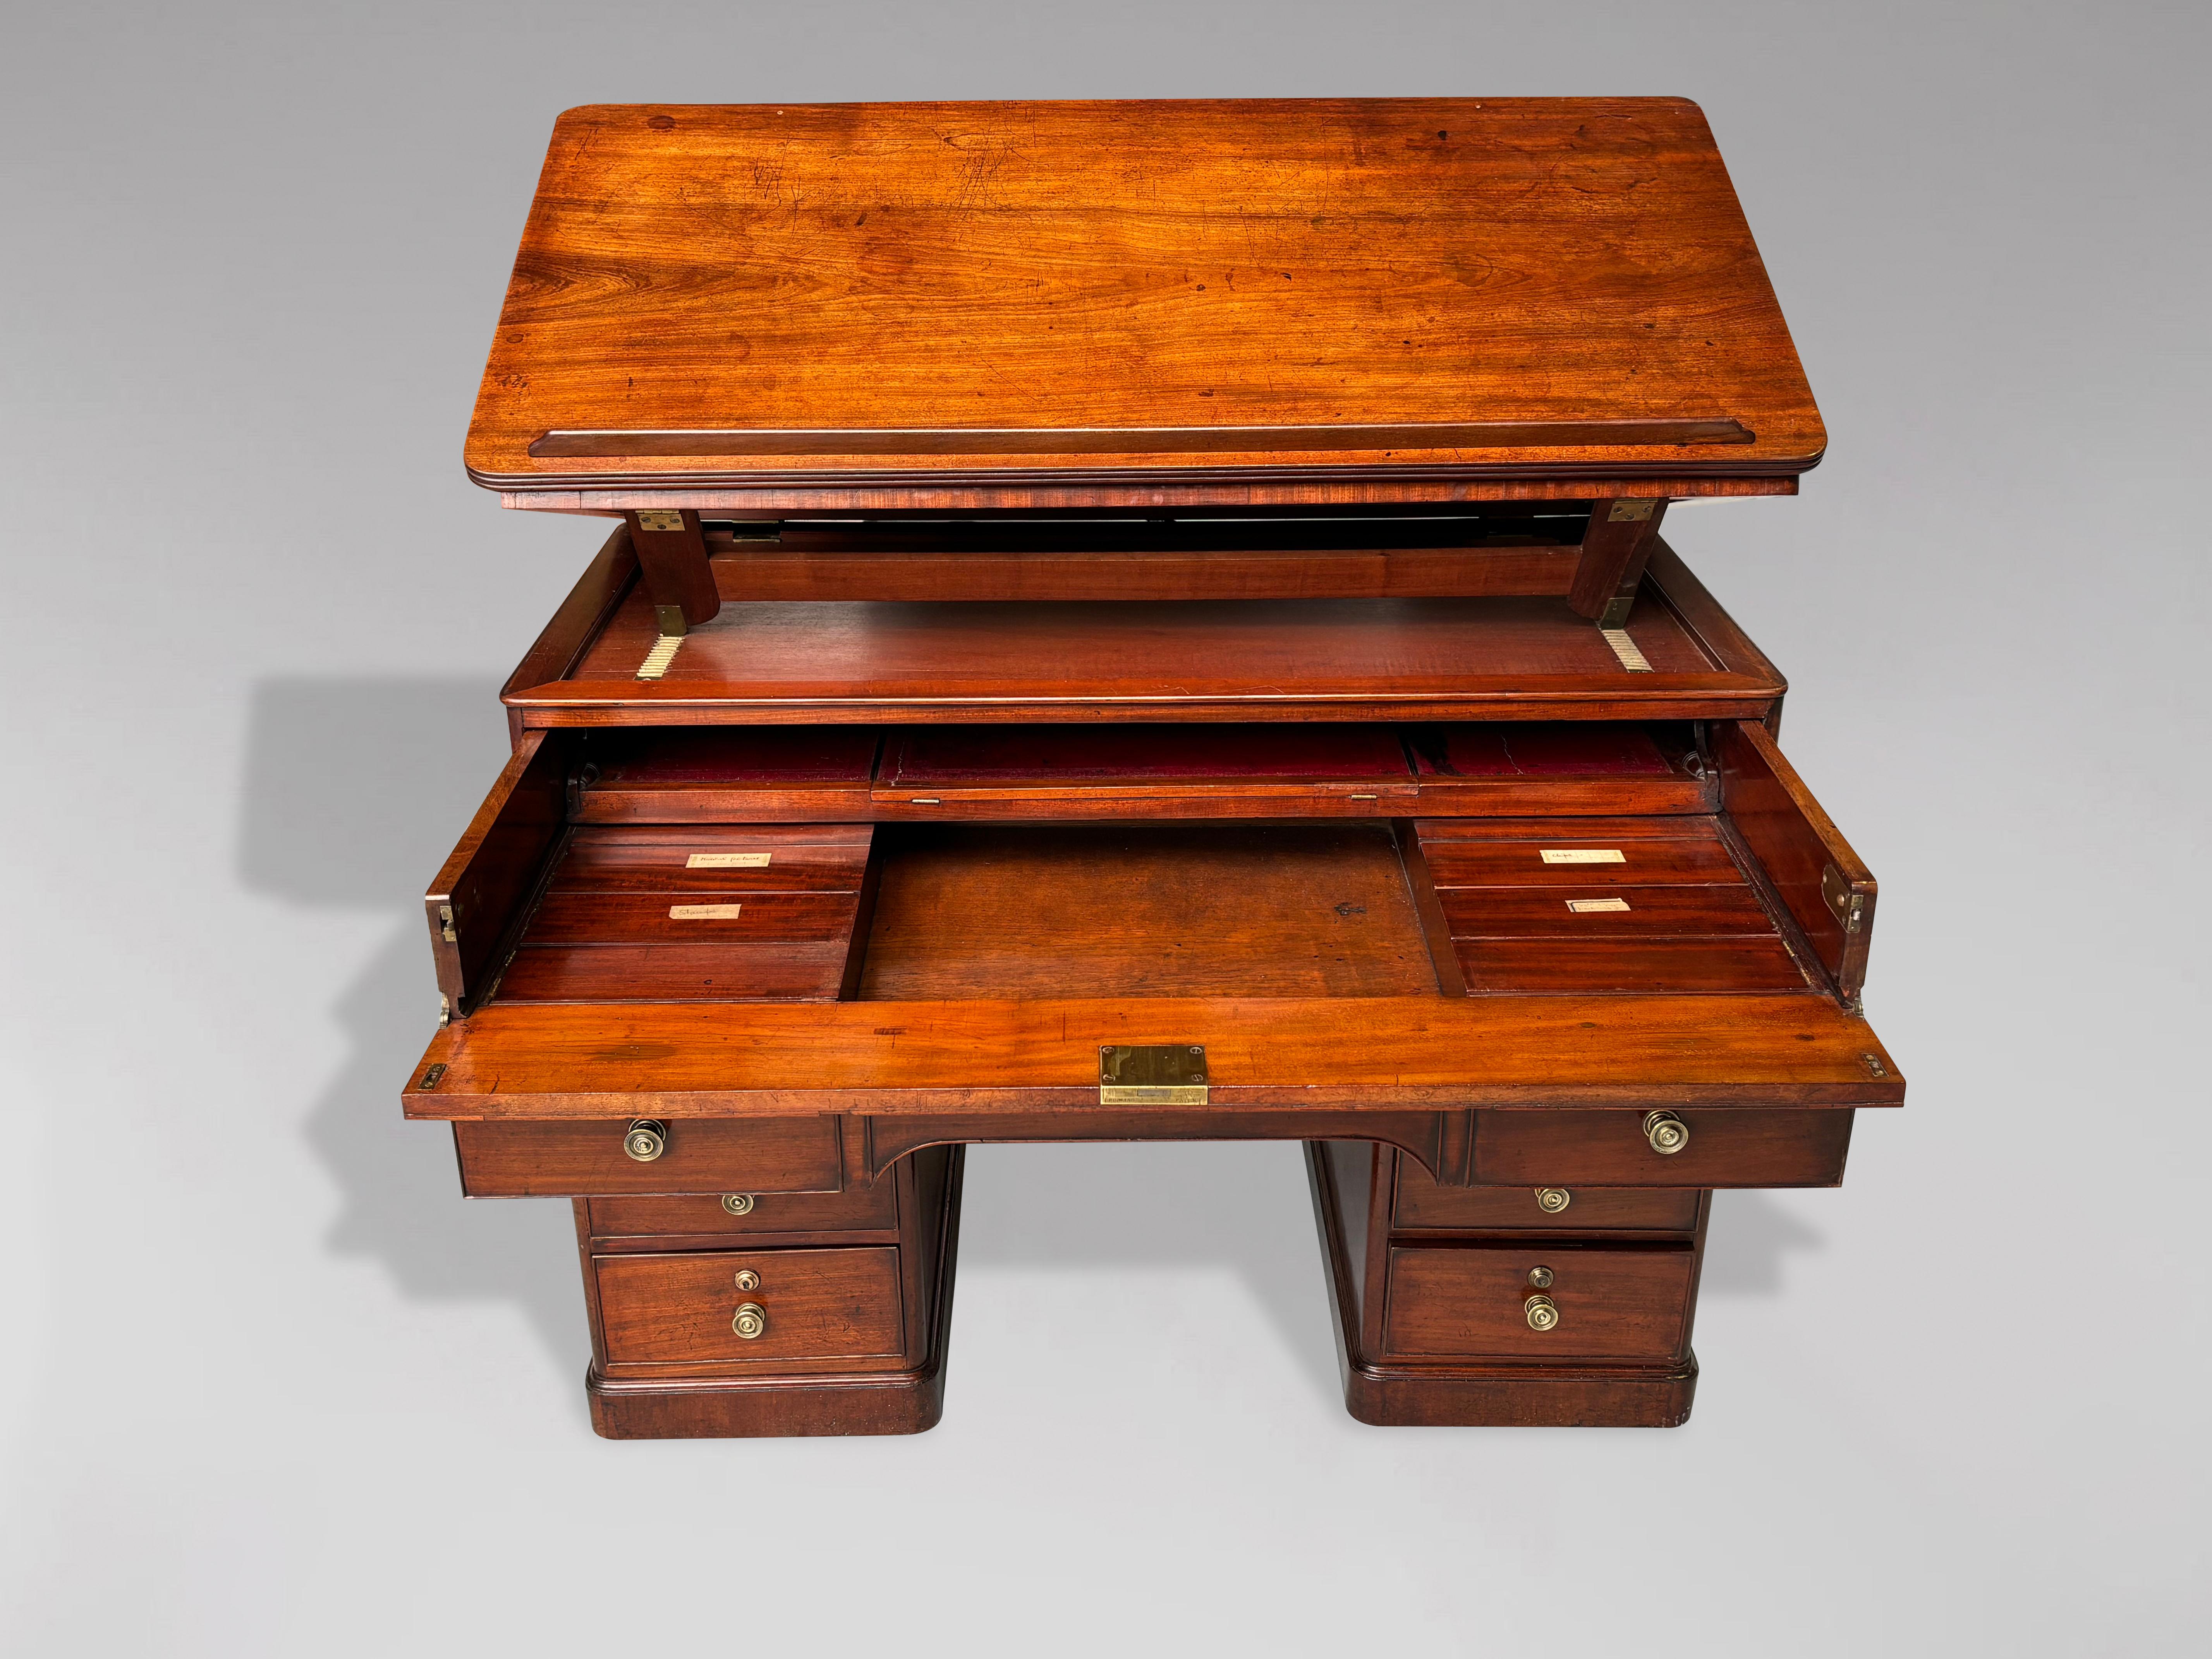 18th Century George III Period Mahogany Architect's Desk In Good Condition For Sale In Petworth,West Sussex, GB